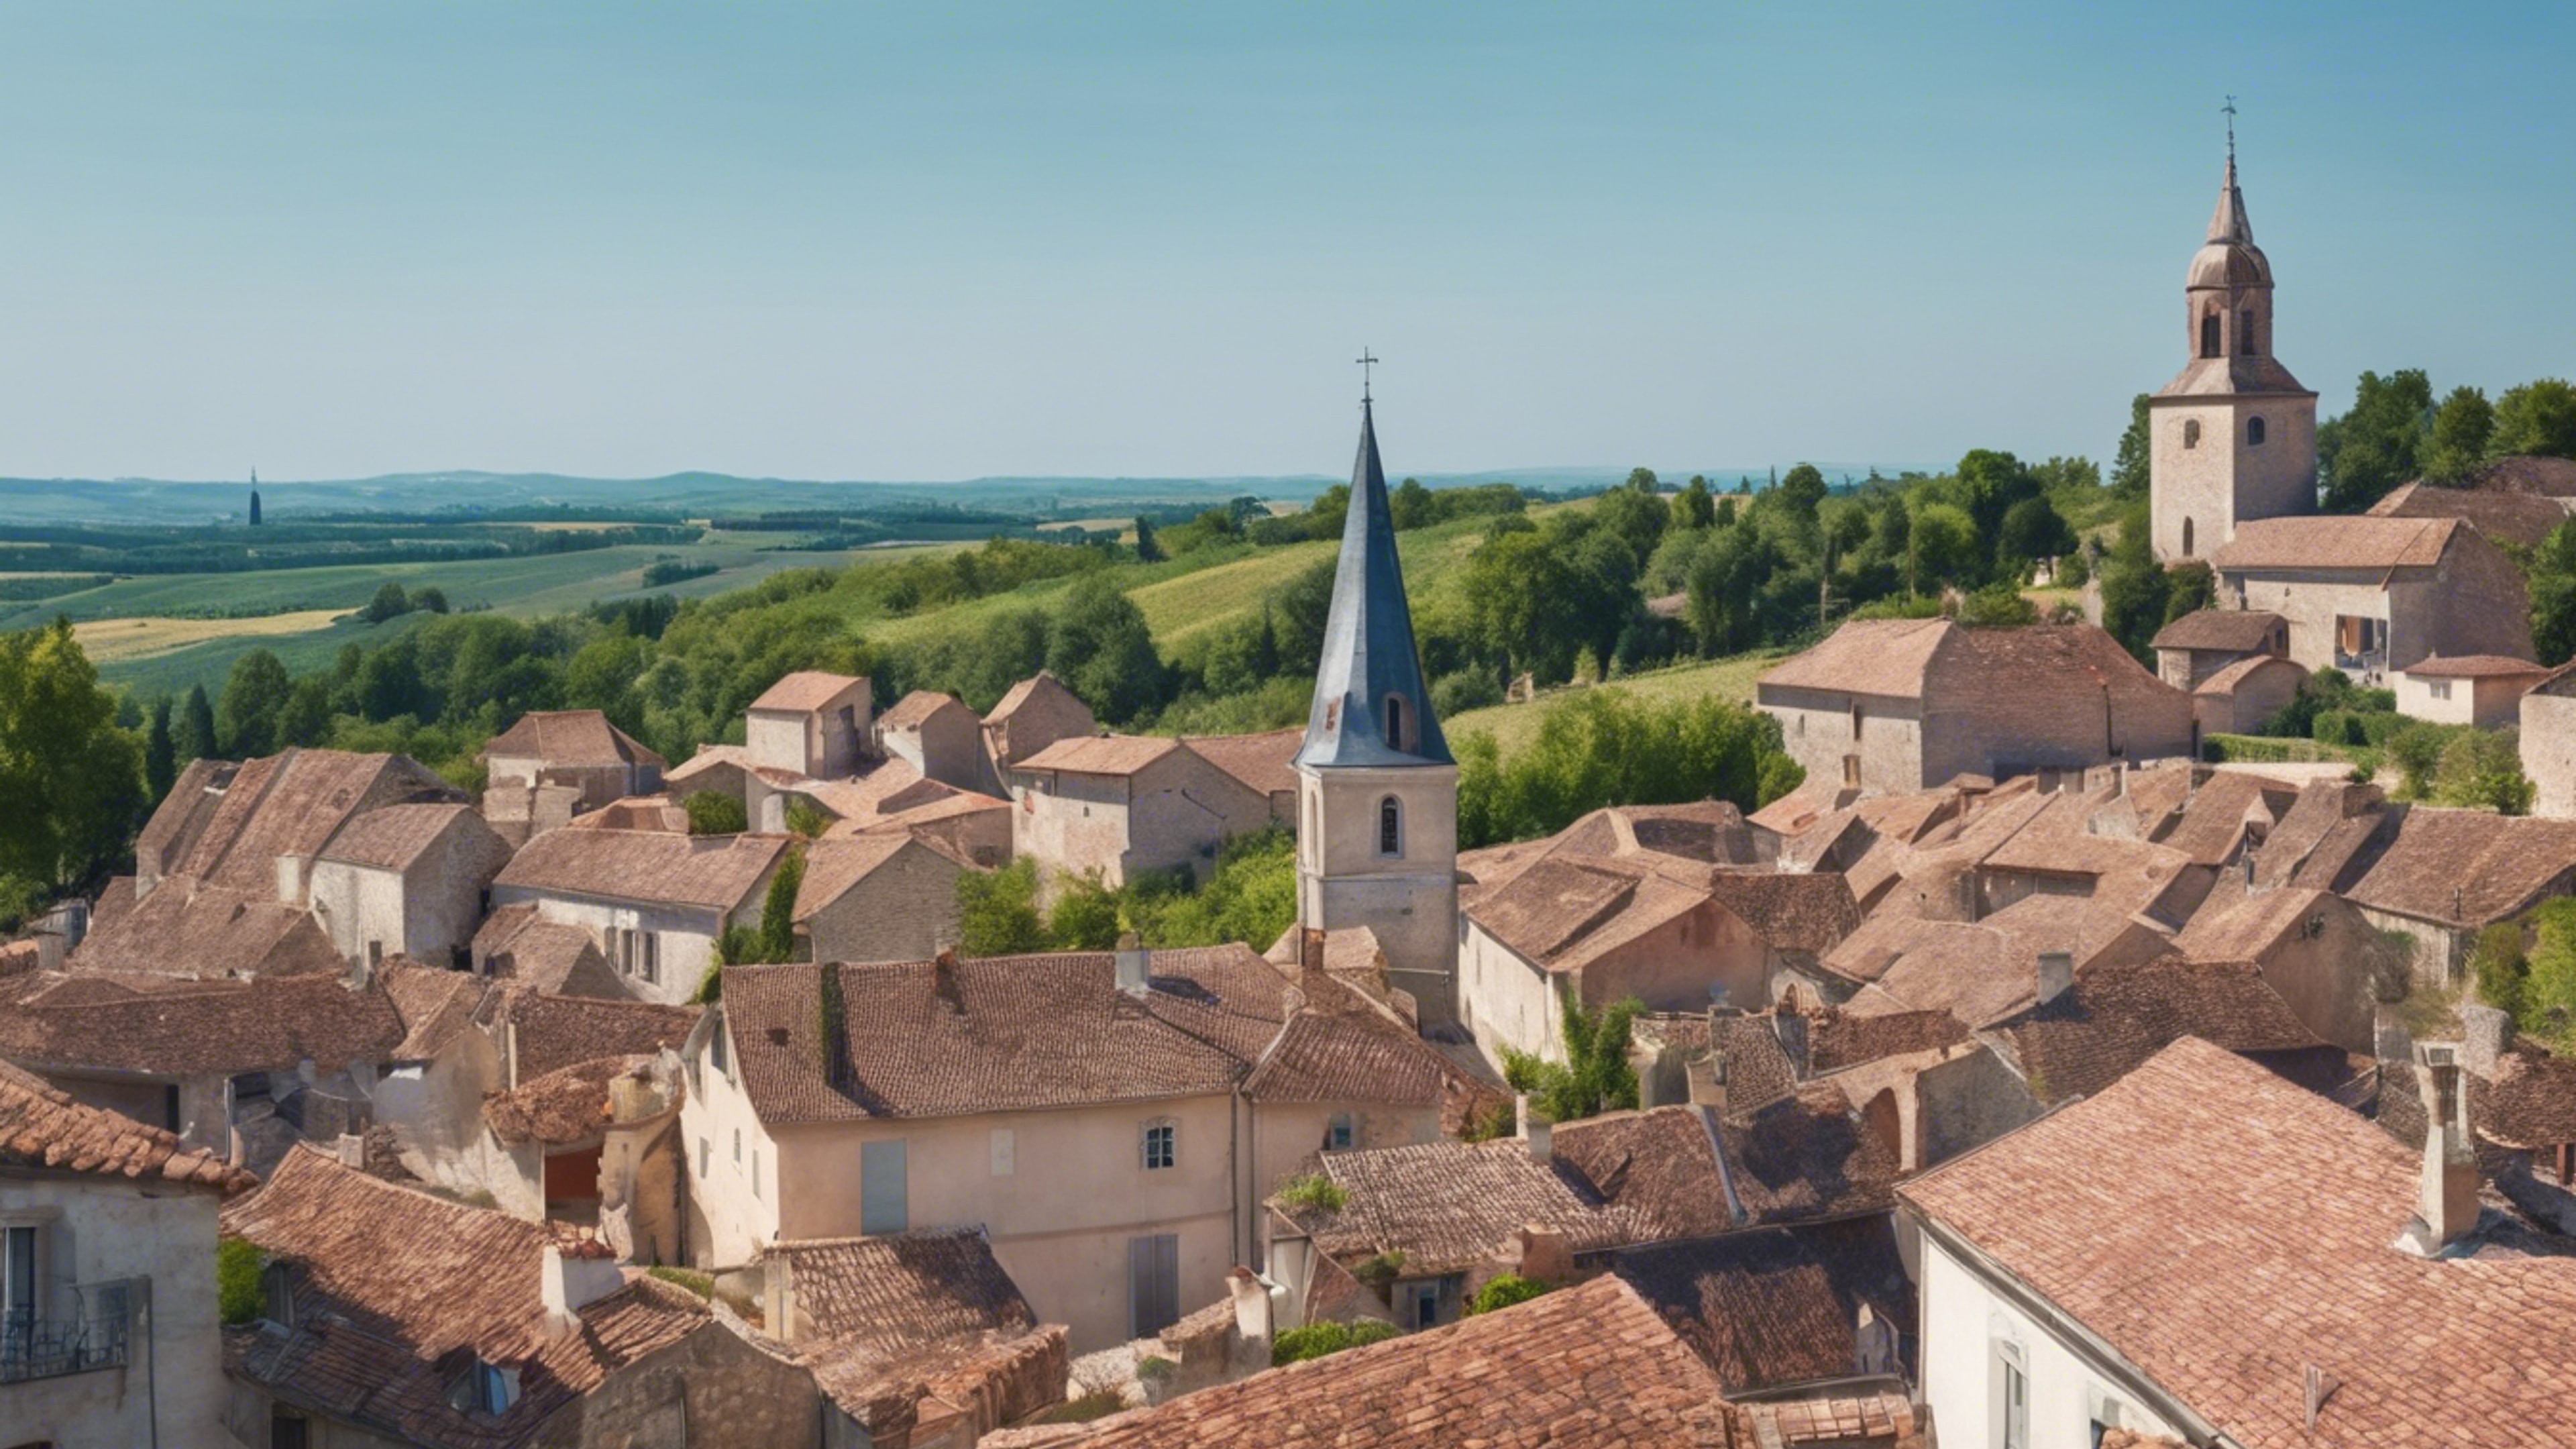 A panoramic view of a French country village with red-tiled roofs, a church spire, and surrounding vineyards under a clear blue sky. วอลล์เปเปอร์[29c4a00e876546cab0f2]